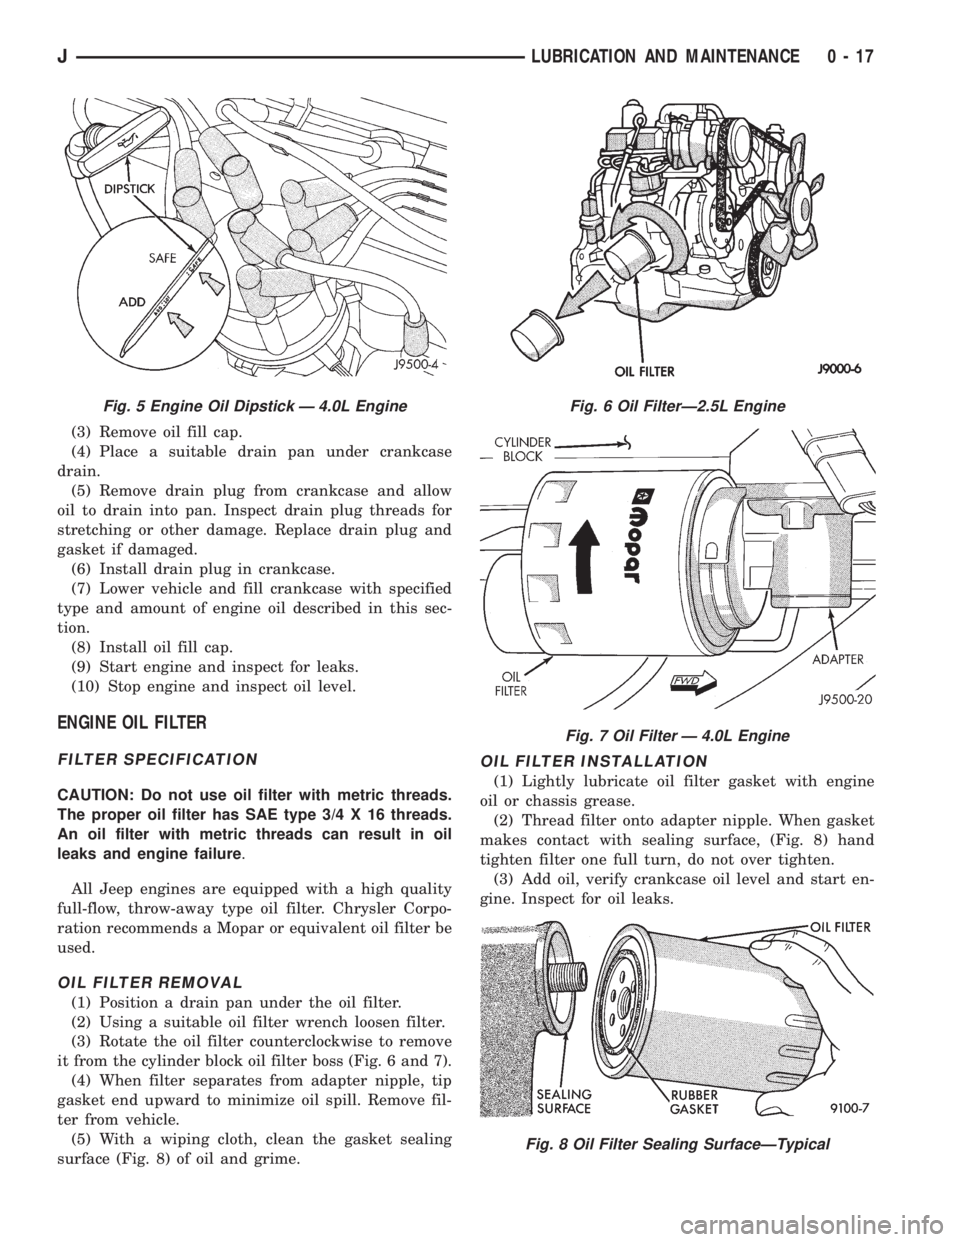 JEEP YJ 1995  Service And Repair Manual (3) Remove oil fill cap.
(4) Place a suitable drain pan under crankcase
drain.
(5) Remove drain plug from crankcase and allow
oil to drain into pan. Inspect drain plug threads for
stretching or other 